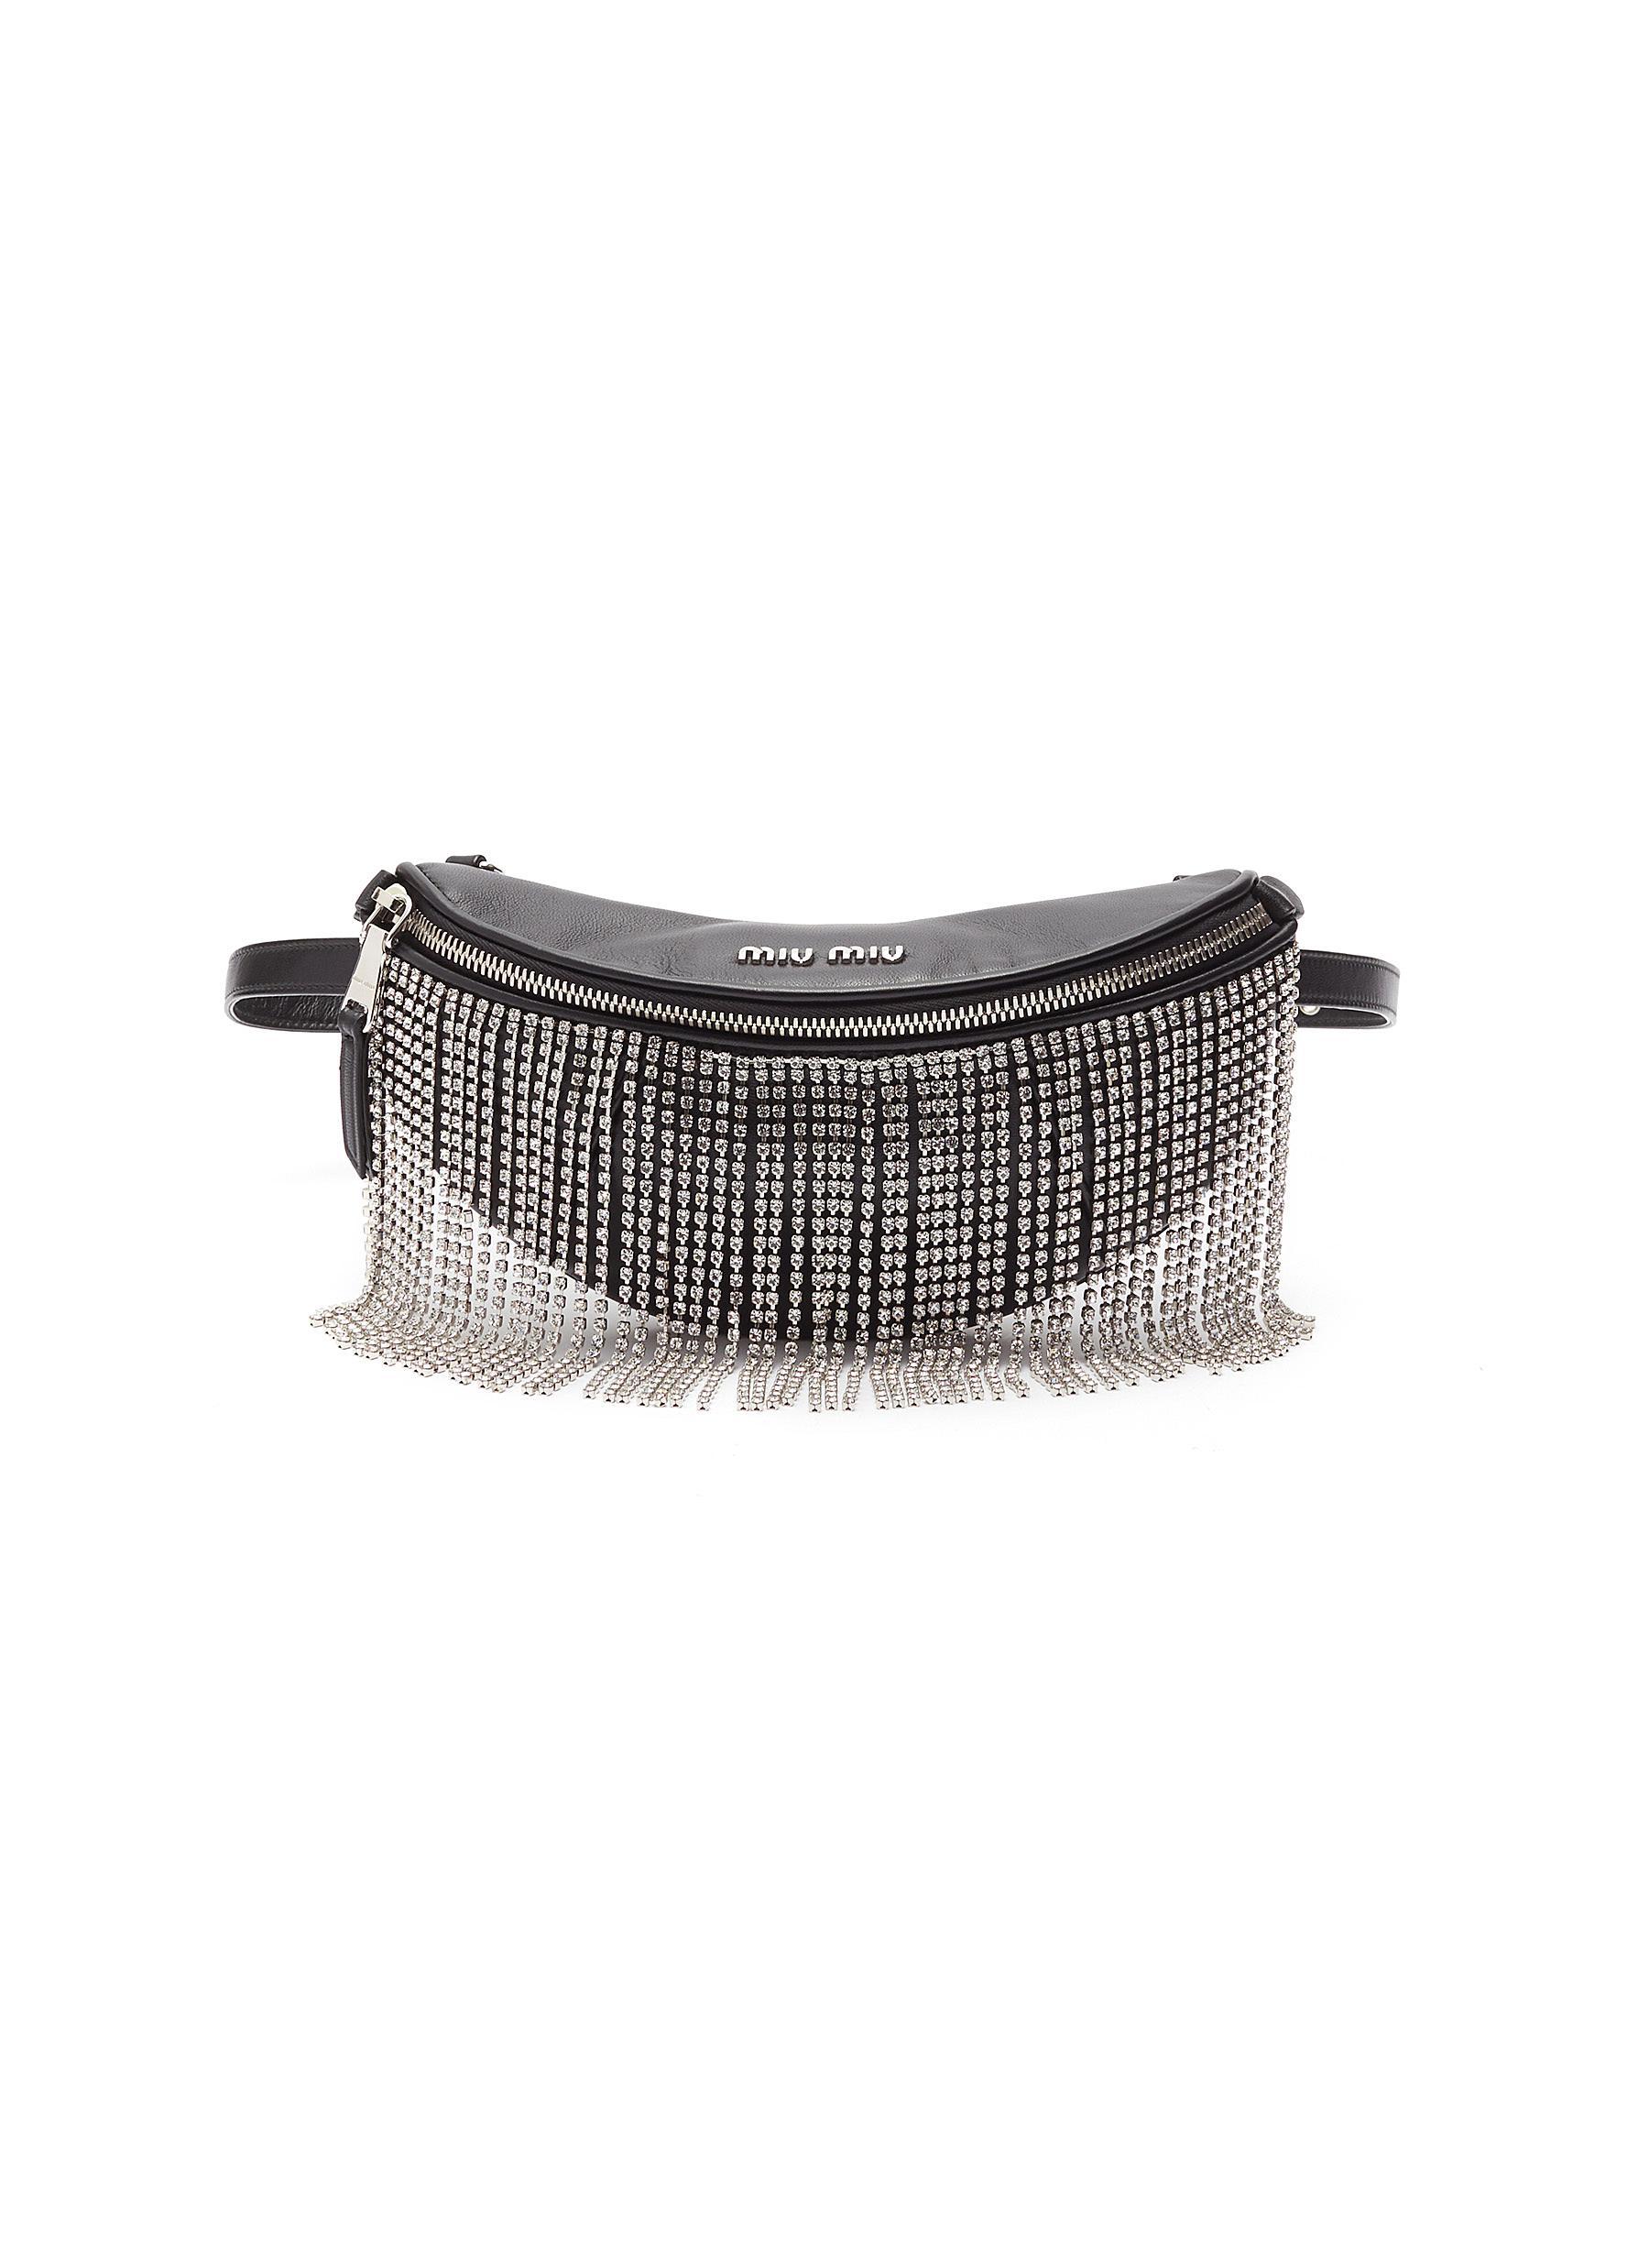 Miu Miu Leather Crystal Fringes Fanny Pack in Black | Lyst